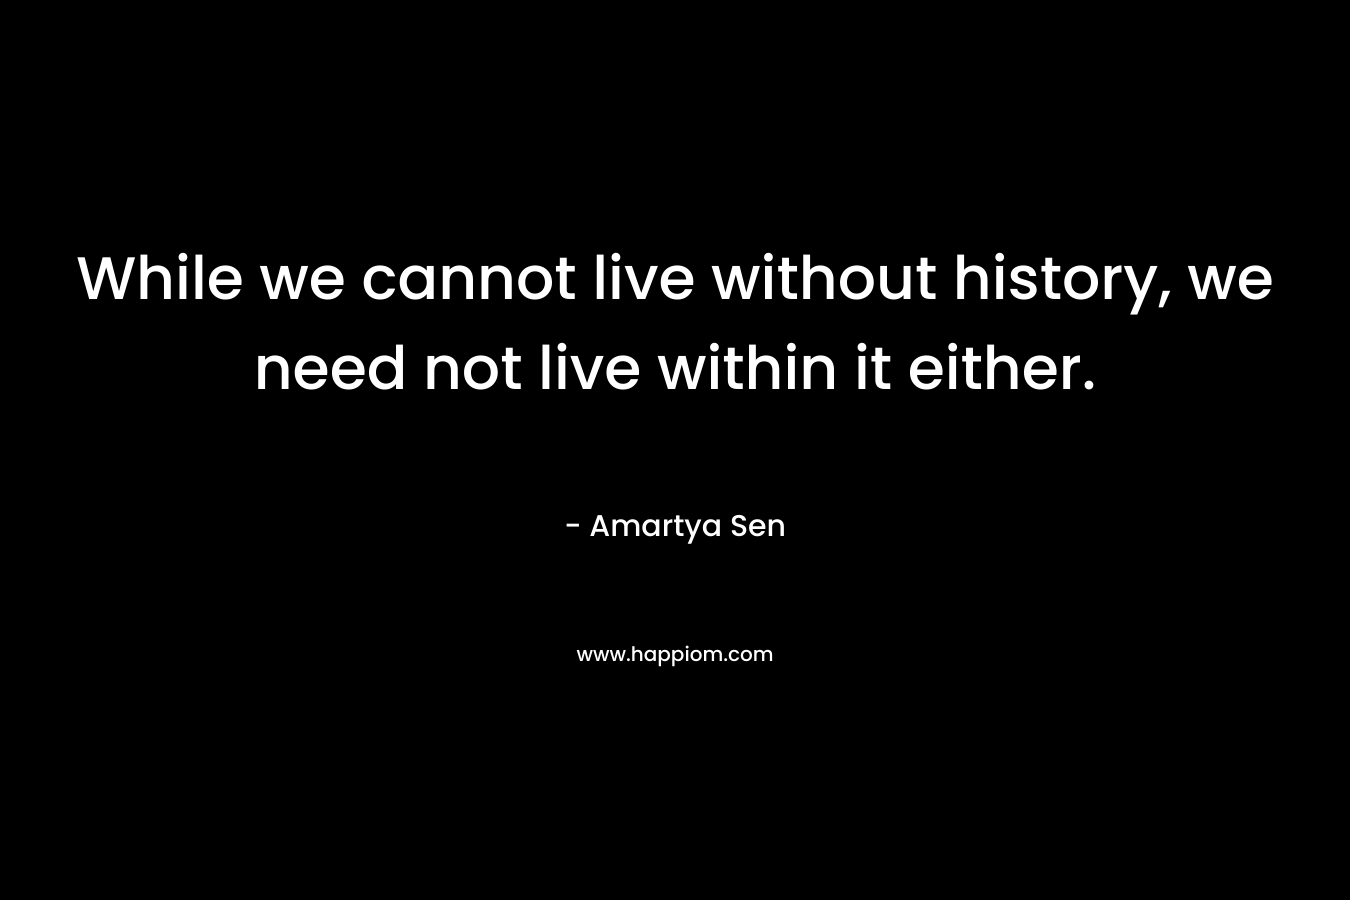 While we cannot live without history, we need not live within it either. – Amartya Sen